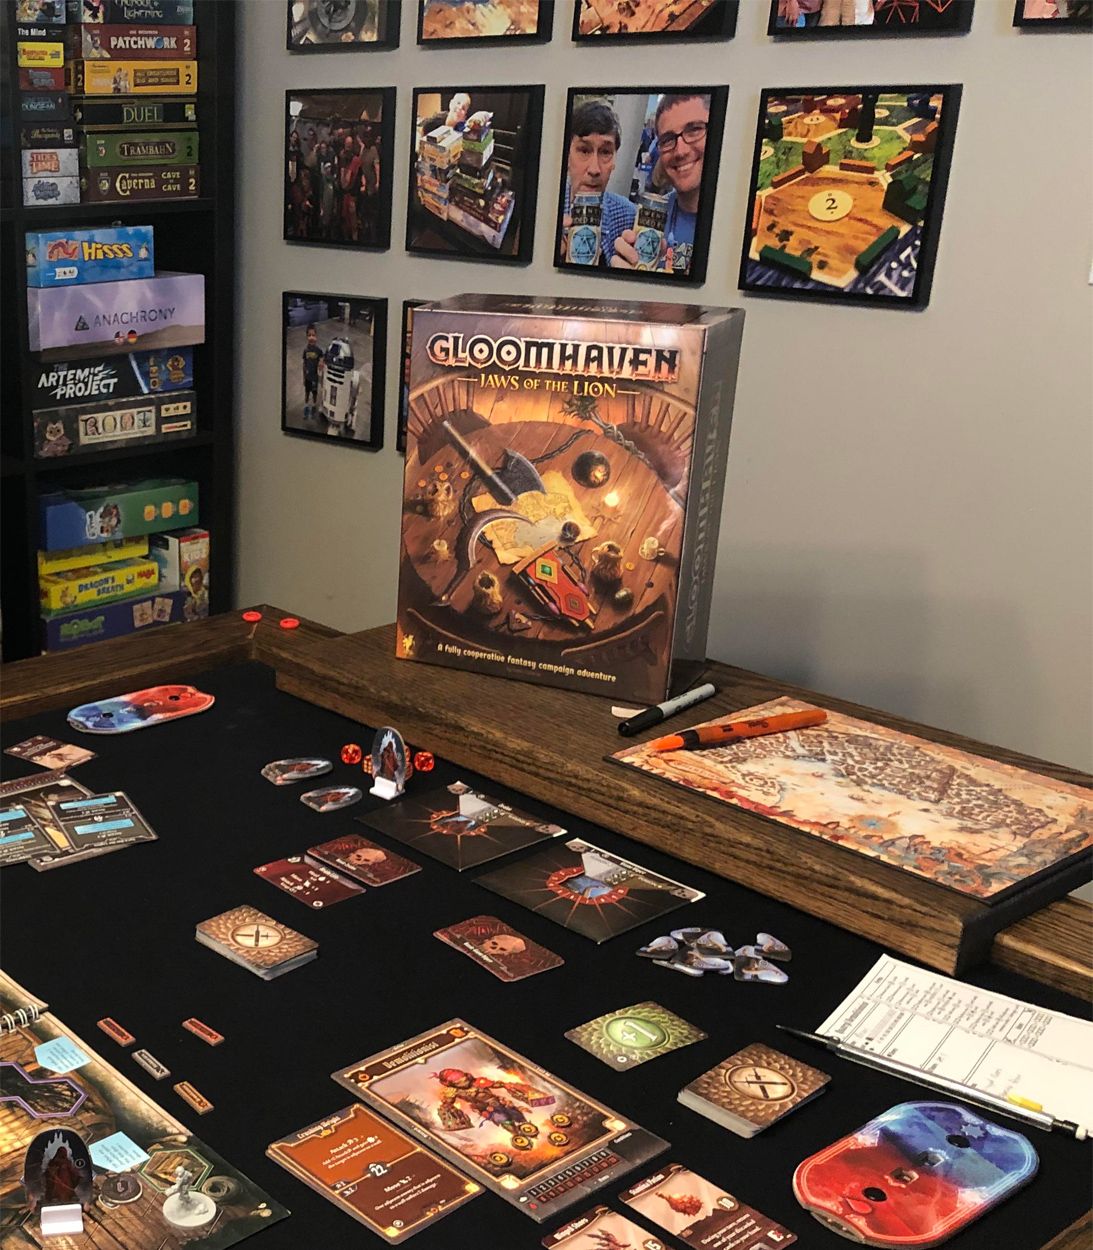 TLDR Gloomhaven Board Game